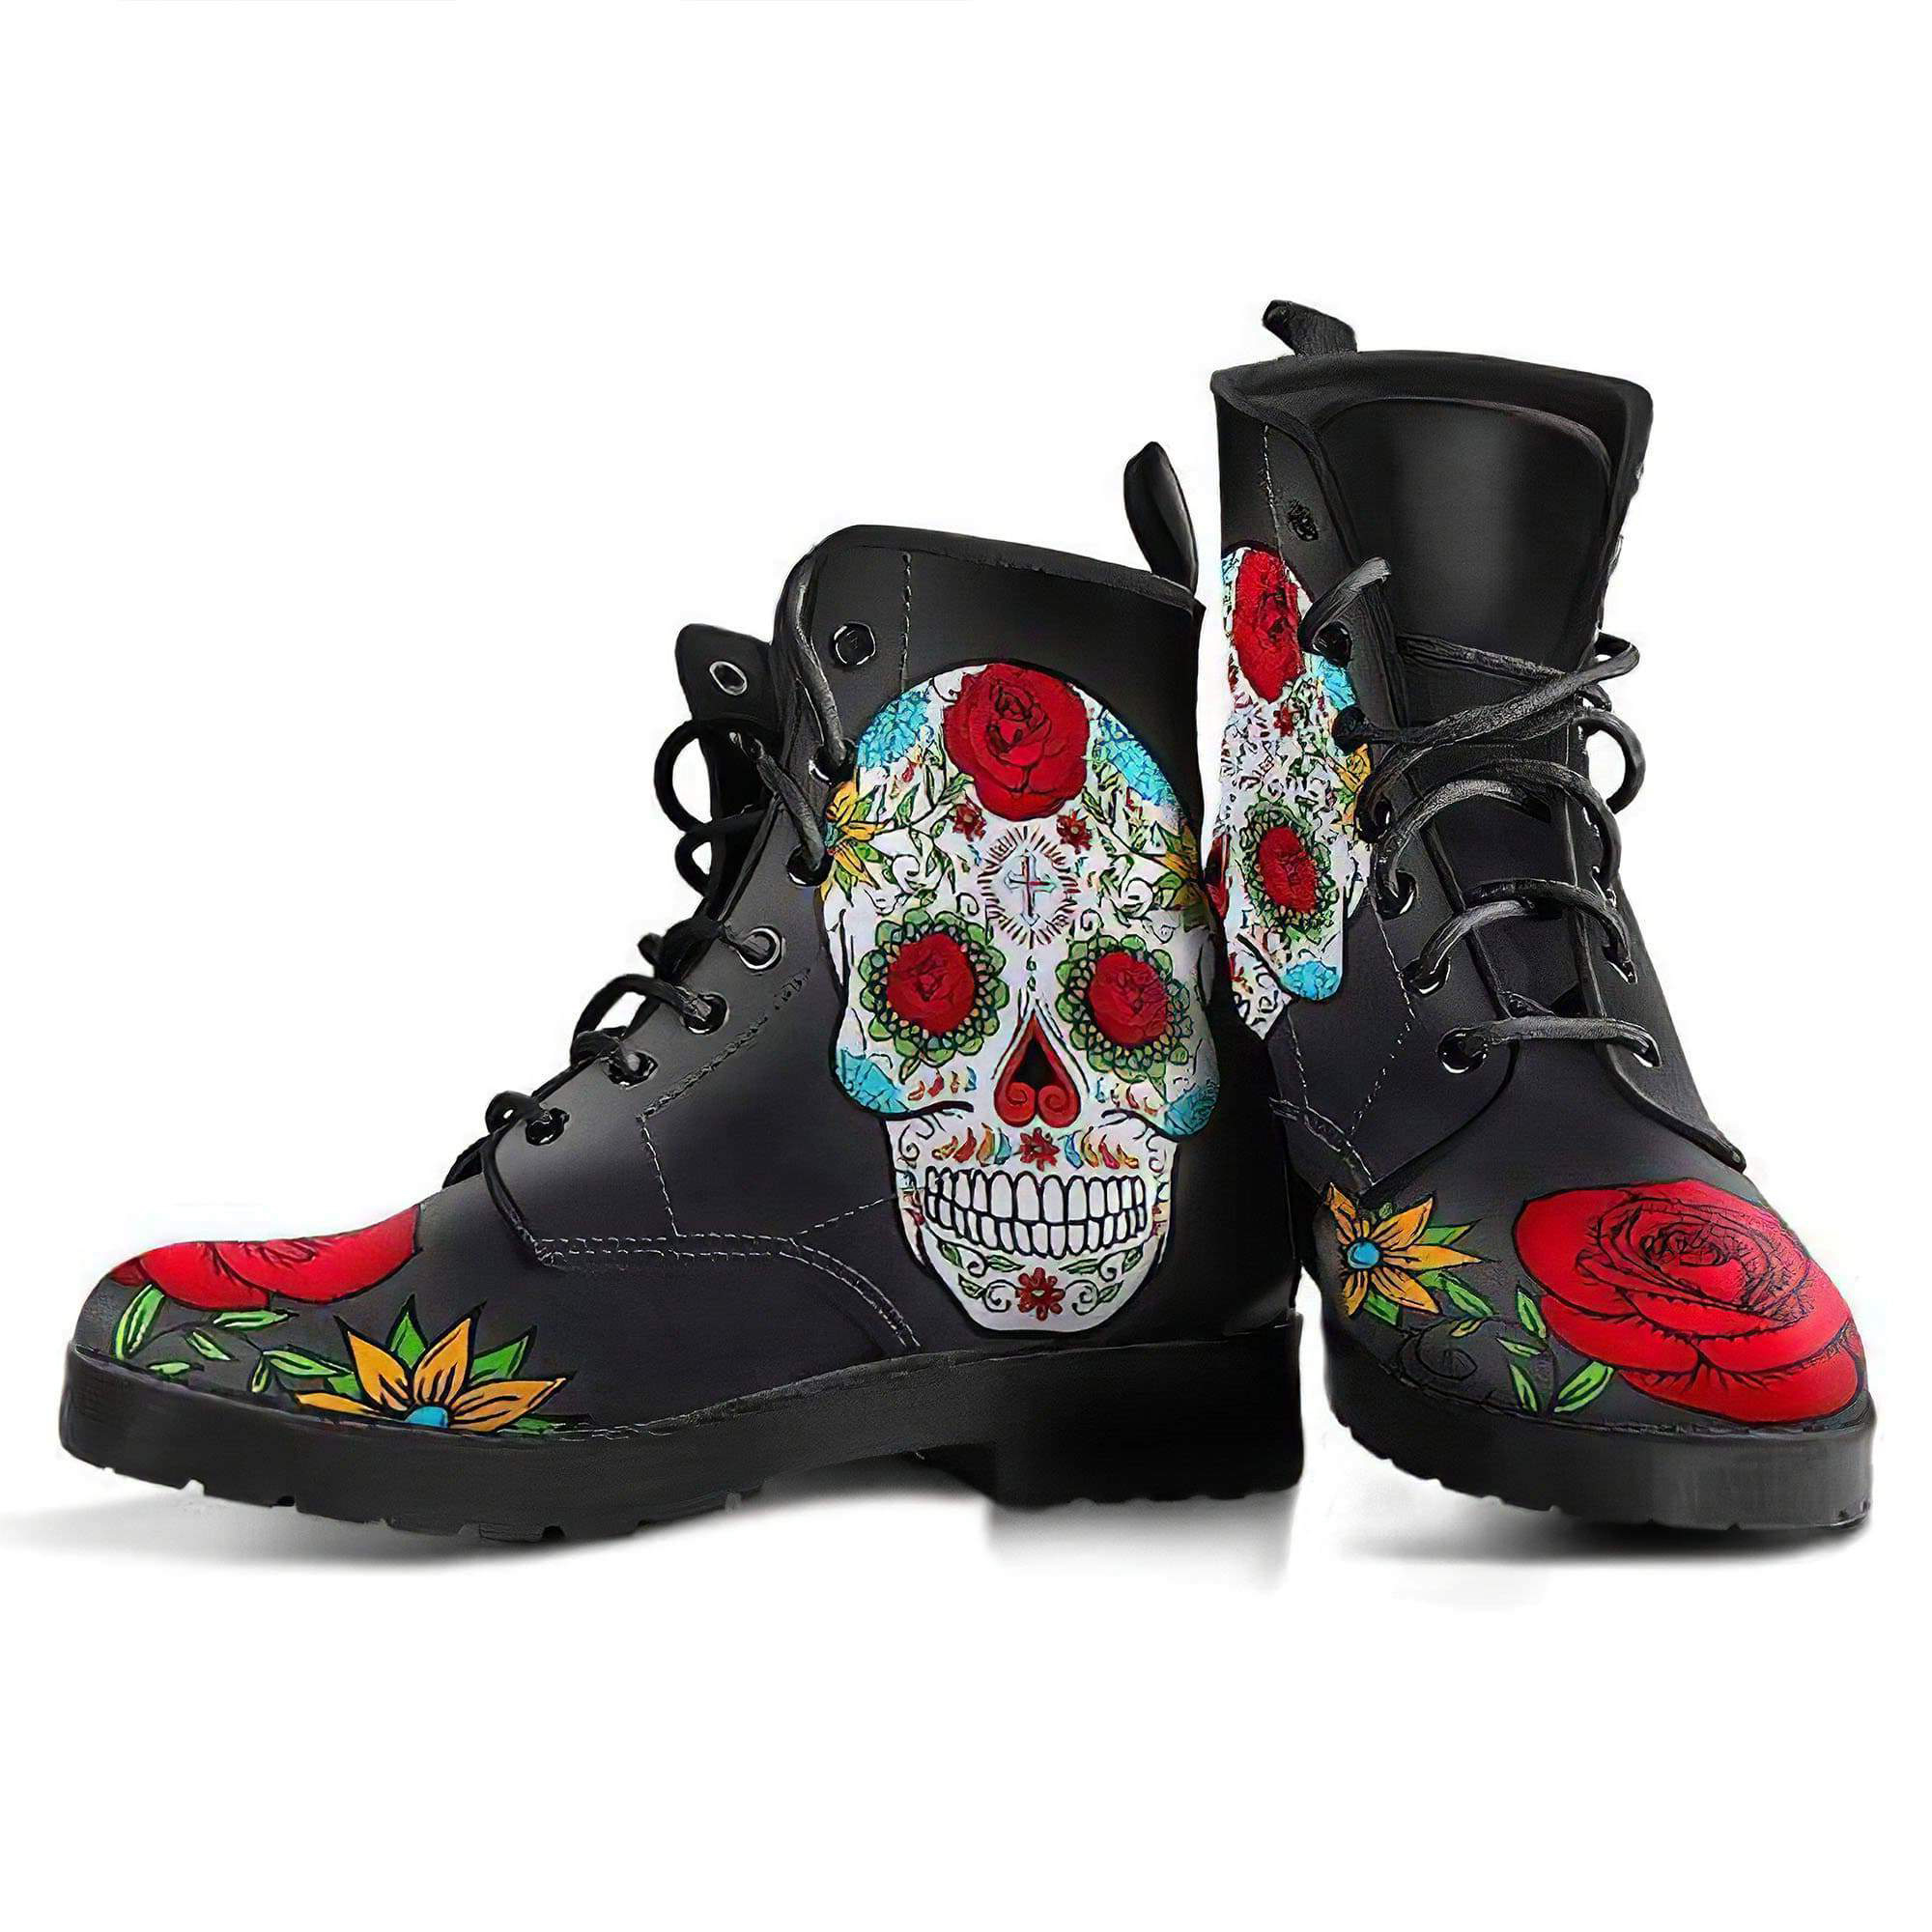 sugar-skull-women-s-leather-boots-women-s-leather-boots-12051955974205.jpg